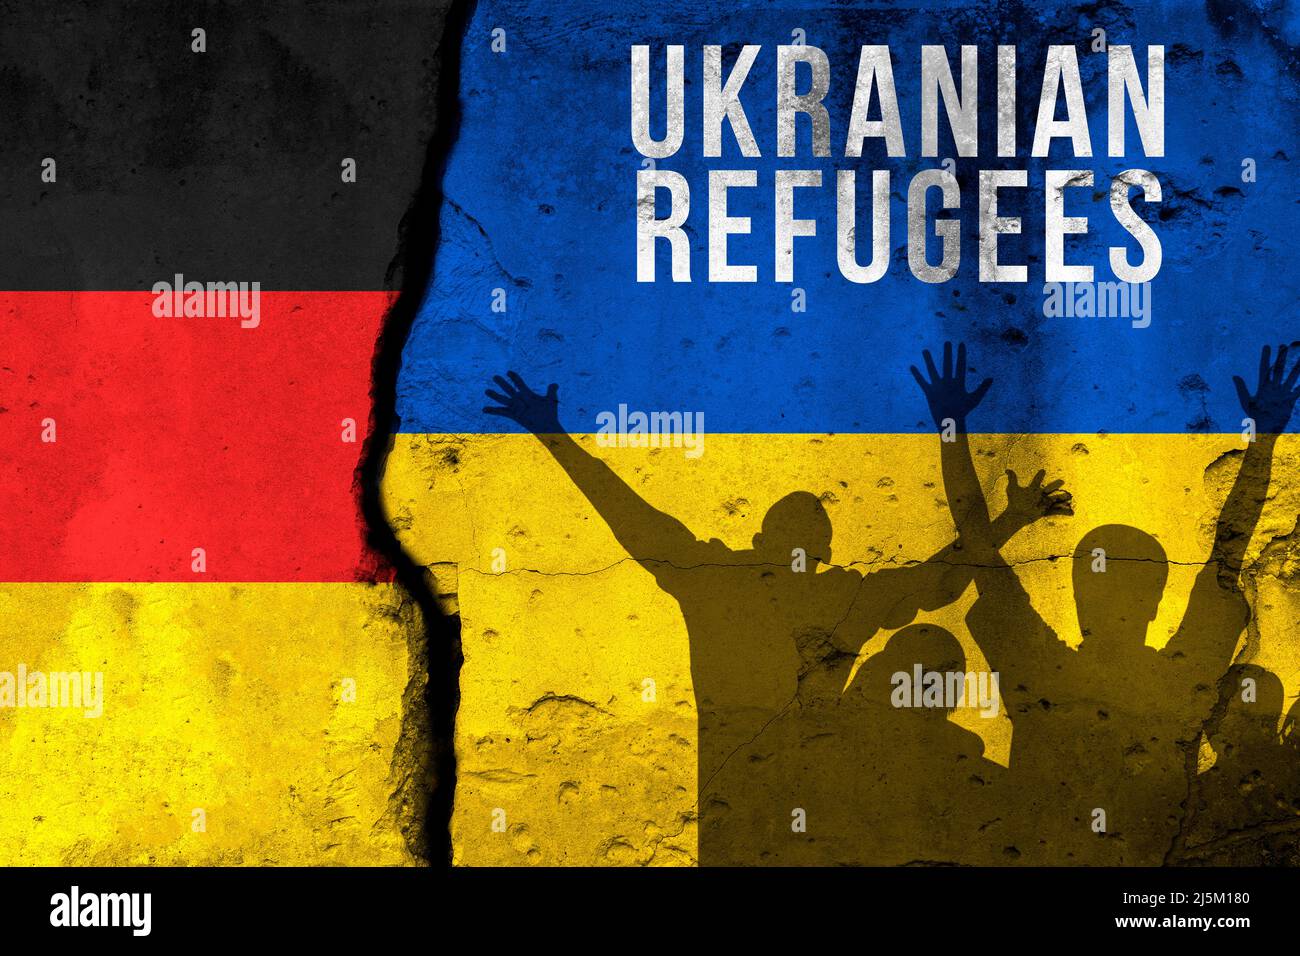 Ukrainian refugees to Germany. War and military conflict, Russia aggressor. Crisis, migration and emigration. Flags background with text Stock Photo